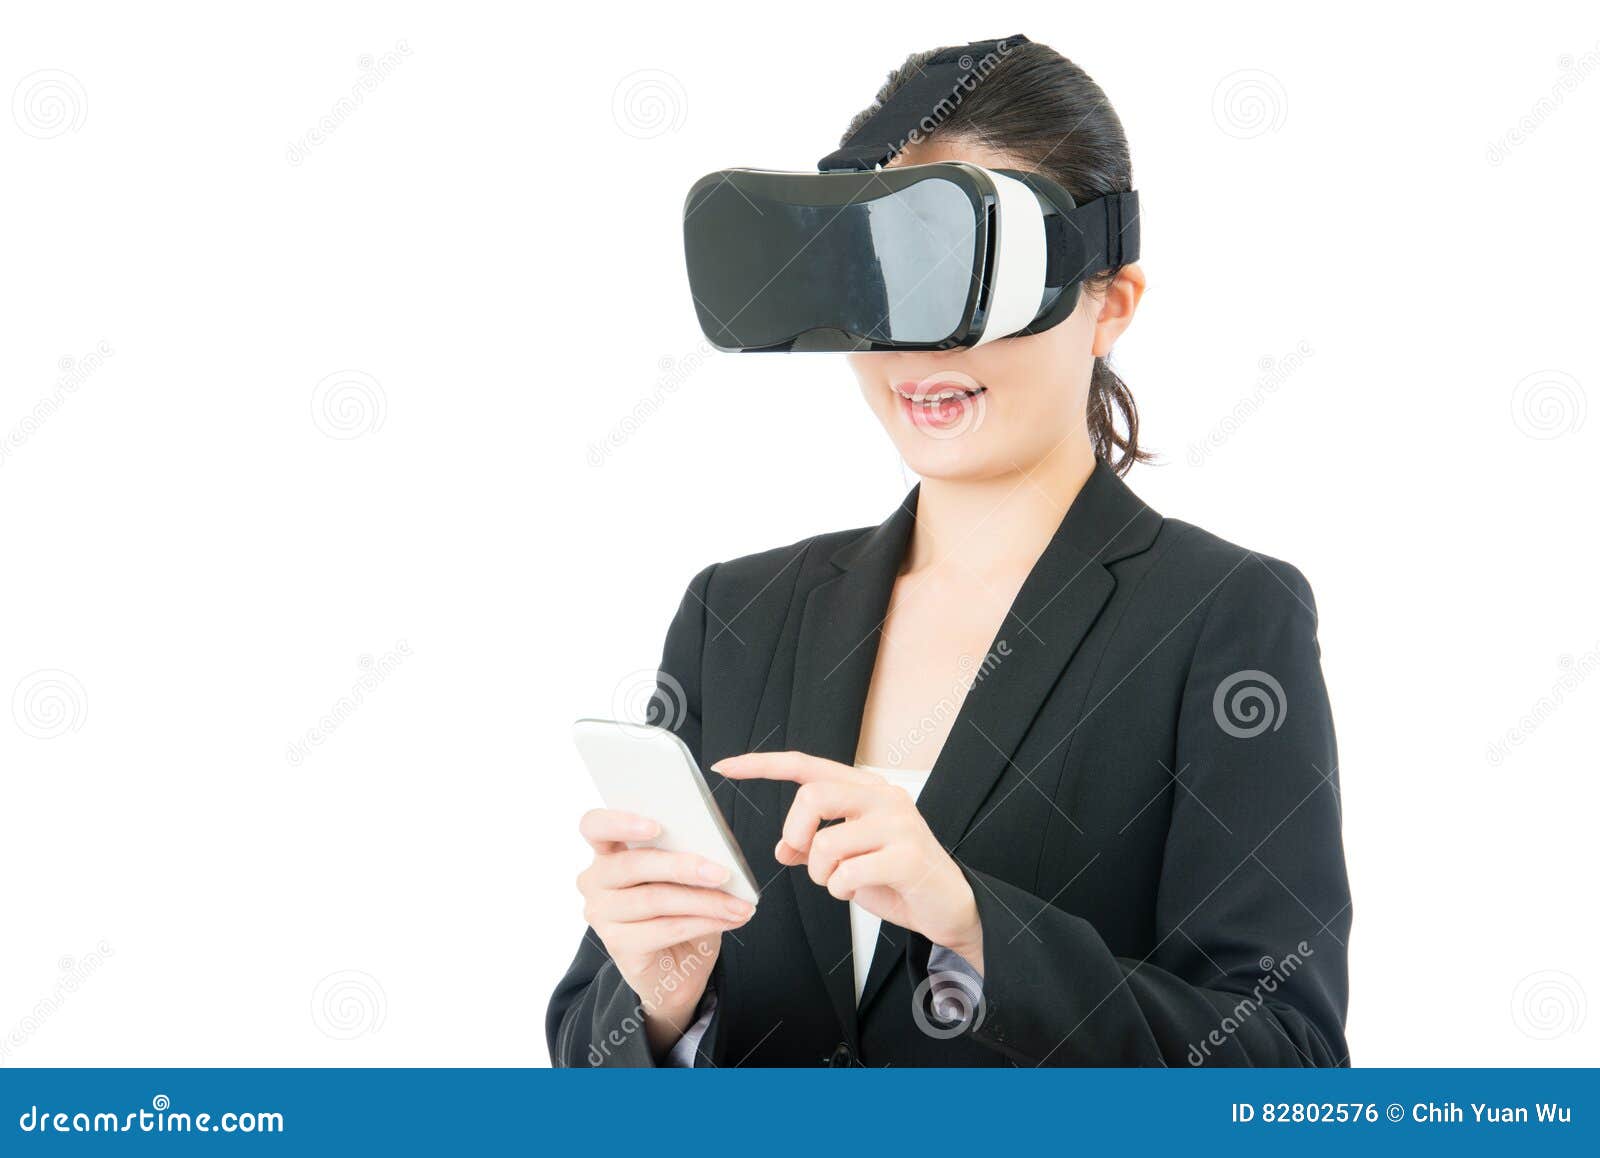 død Formode At håndtere Asian Business Woman Use Smart Phone Control VR Headset Stock Photo - Image  of person, goggles: 82802576